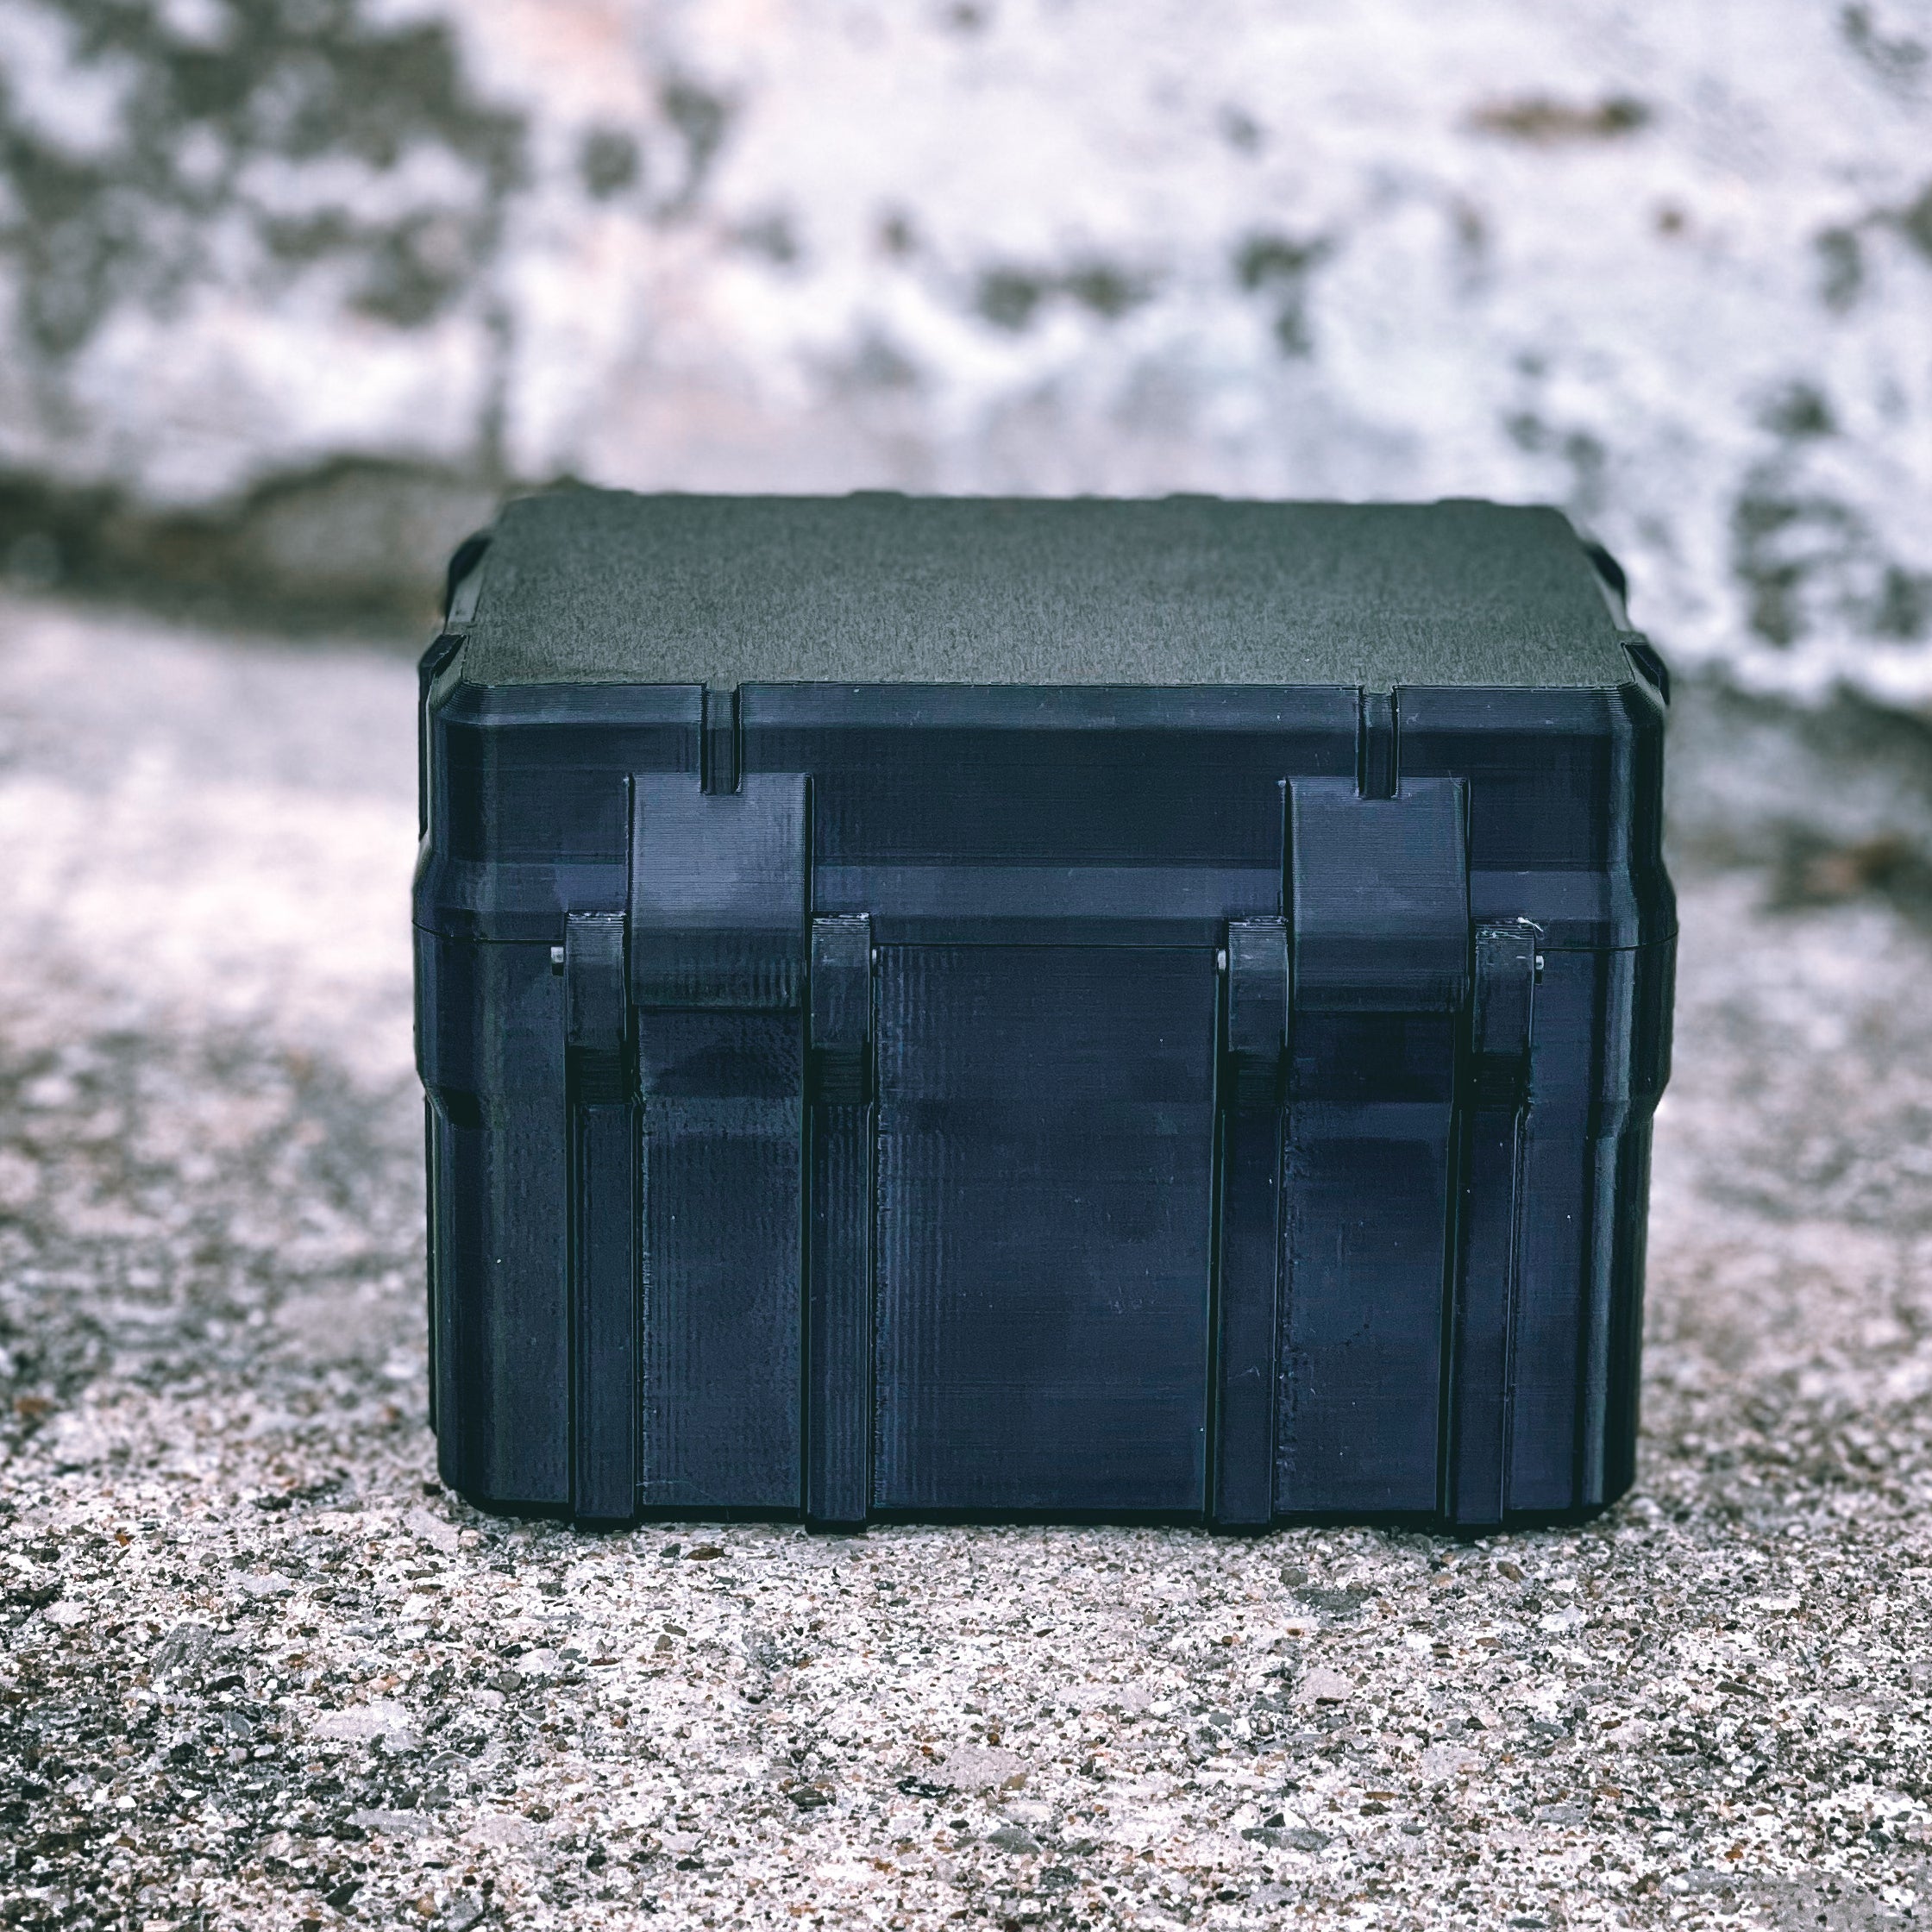 For the best 3D printed Rugged Battery Box designed to fit AAA, AA, CR123, 18650,CR1632, and CR2032 batteries in your vehicle, swat bag, go sack, ready backpack, or junk drawer, shop Four Brothers Holsters. Our battery storage box offers an easy way to store your emergency supply of your critical battery selection.